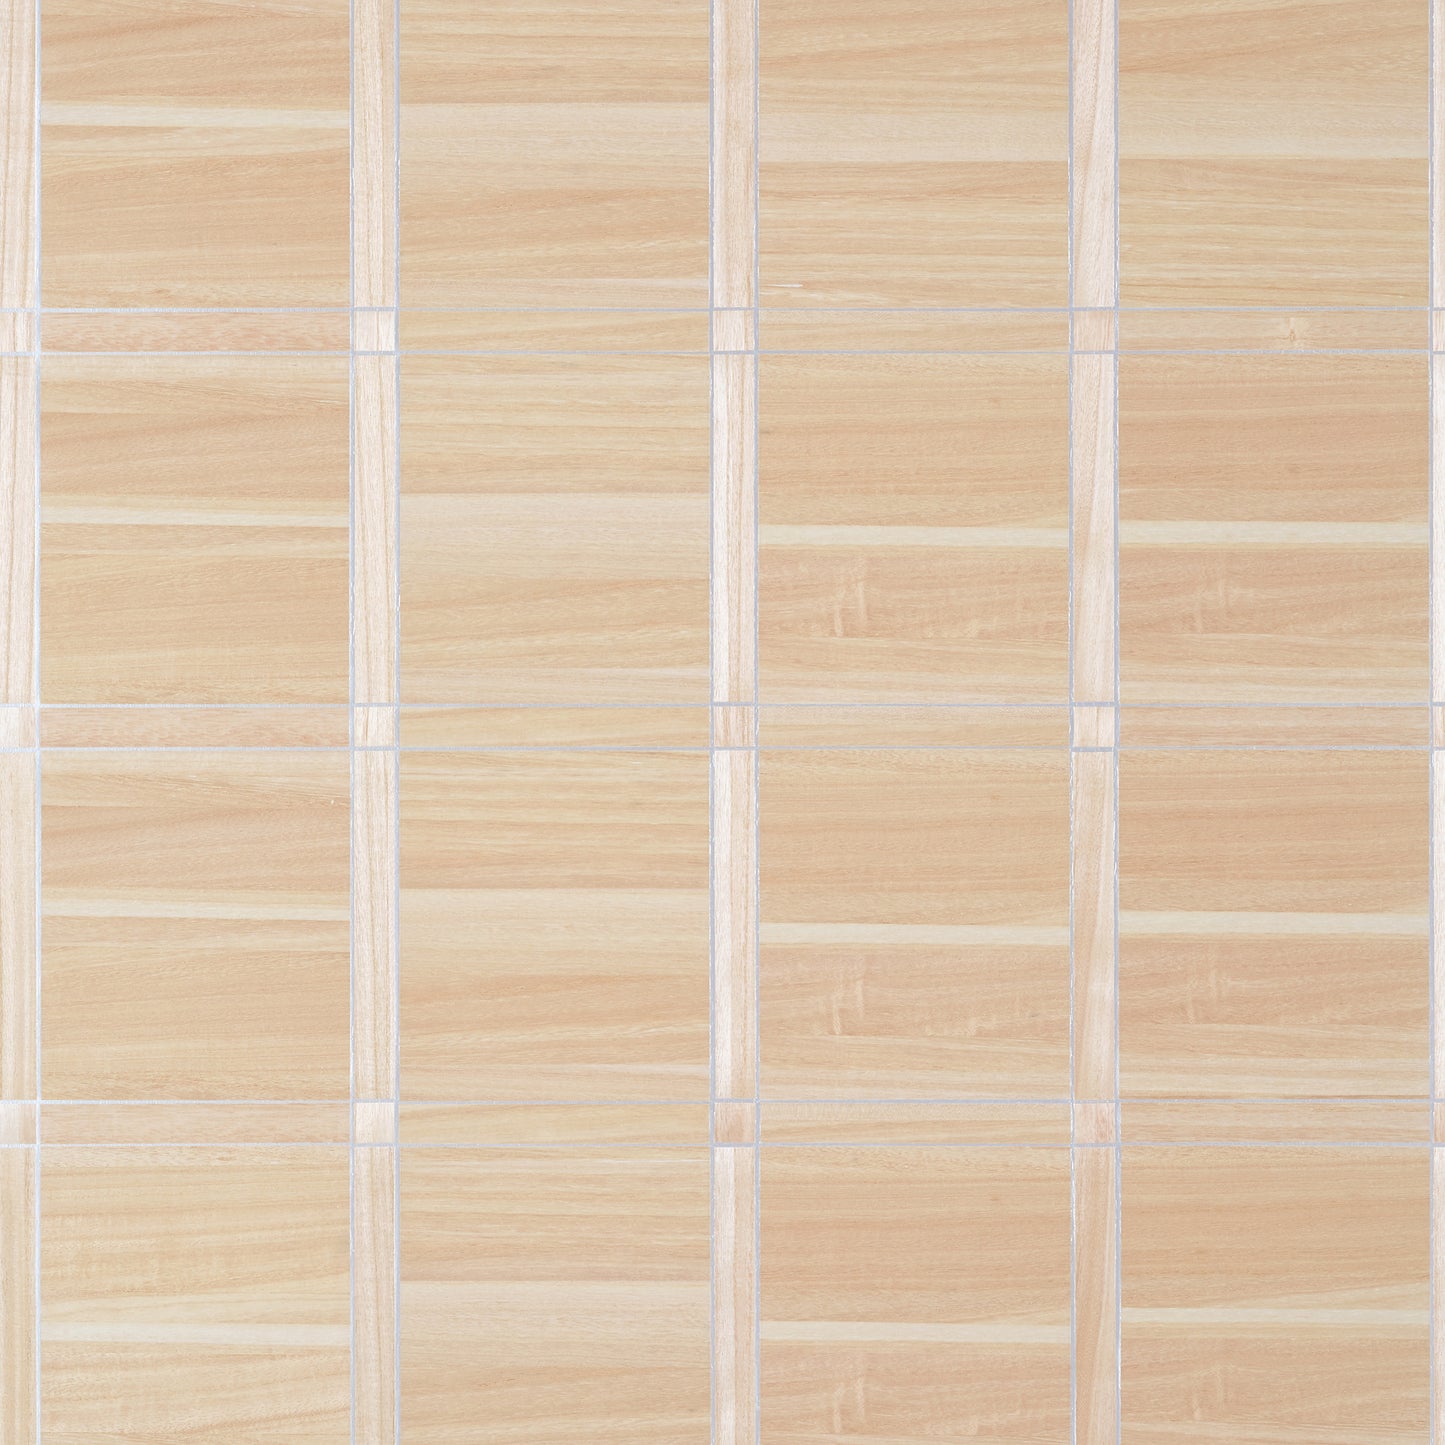 Purchase Thibaut Wallpaper SKU# T41002 pattern name Wood Panel color Natural and Metallic Silver. 